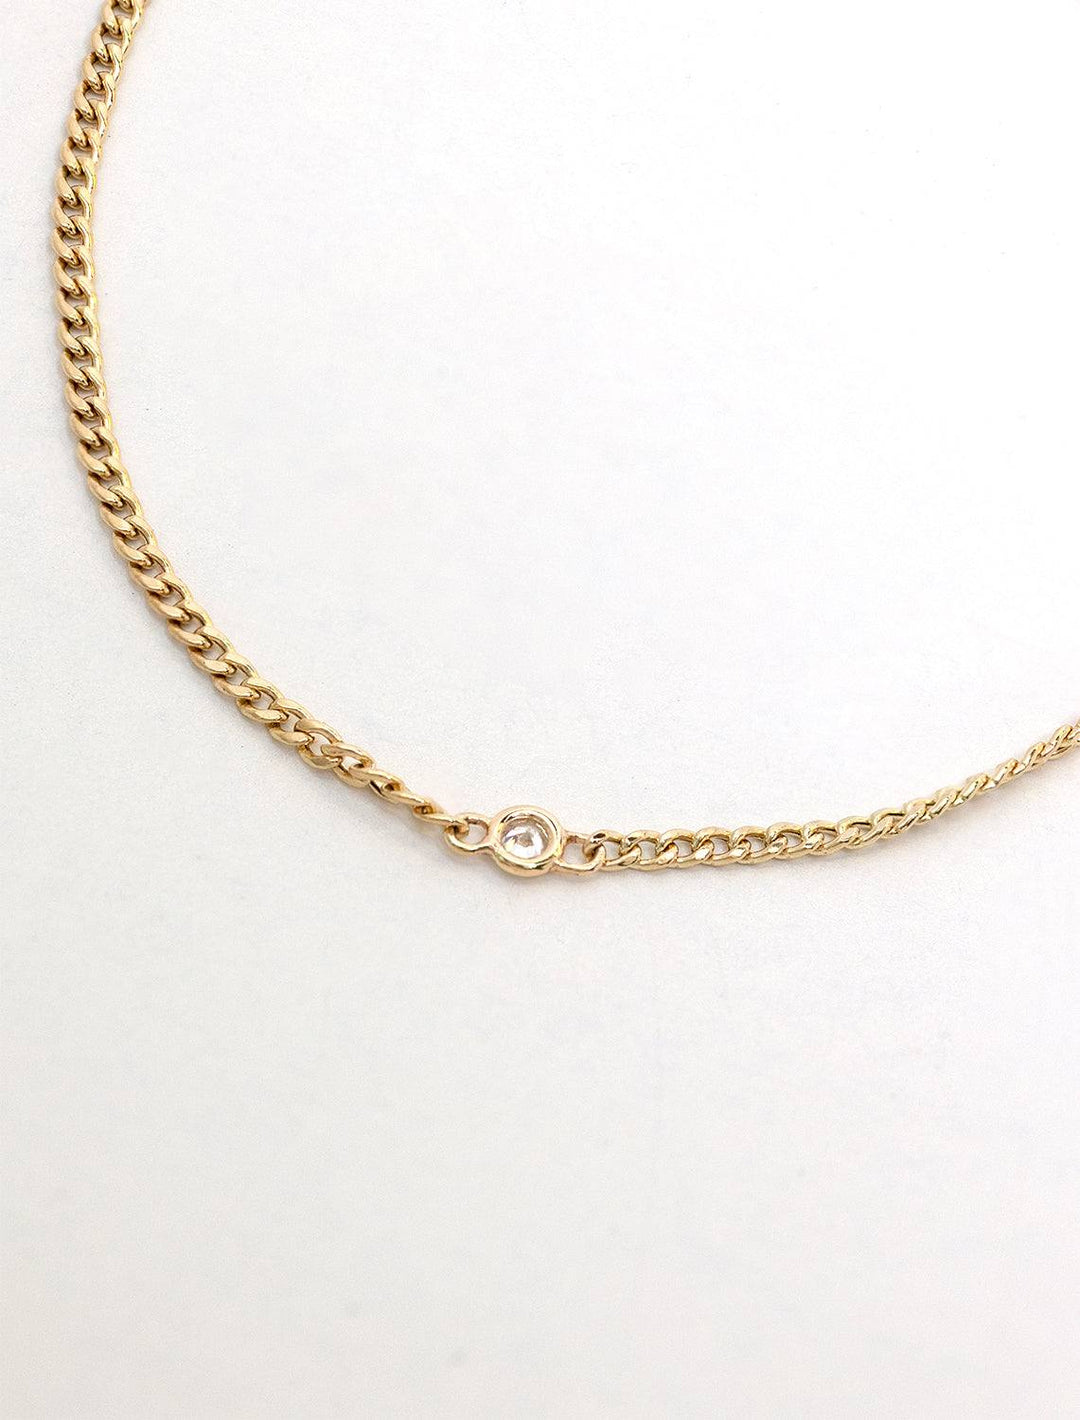 Stylized laydown of Zoe Chicco's 14k extra small curb chain with floating diamond bracelet | 6-7"